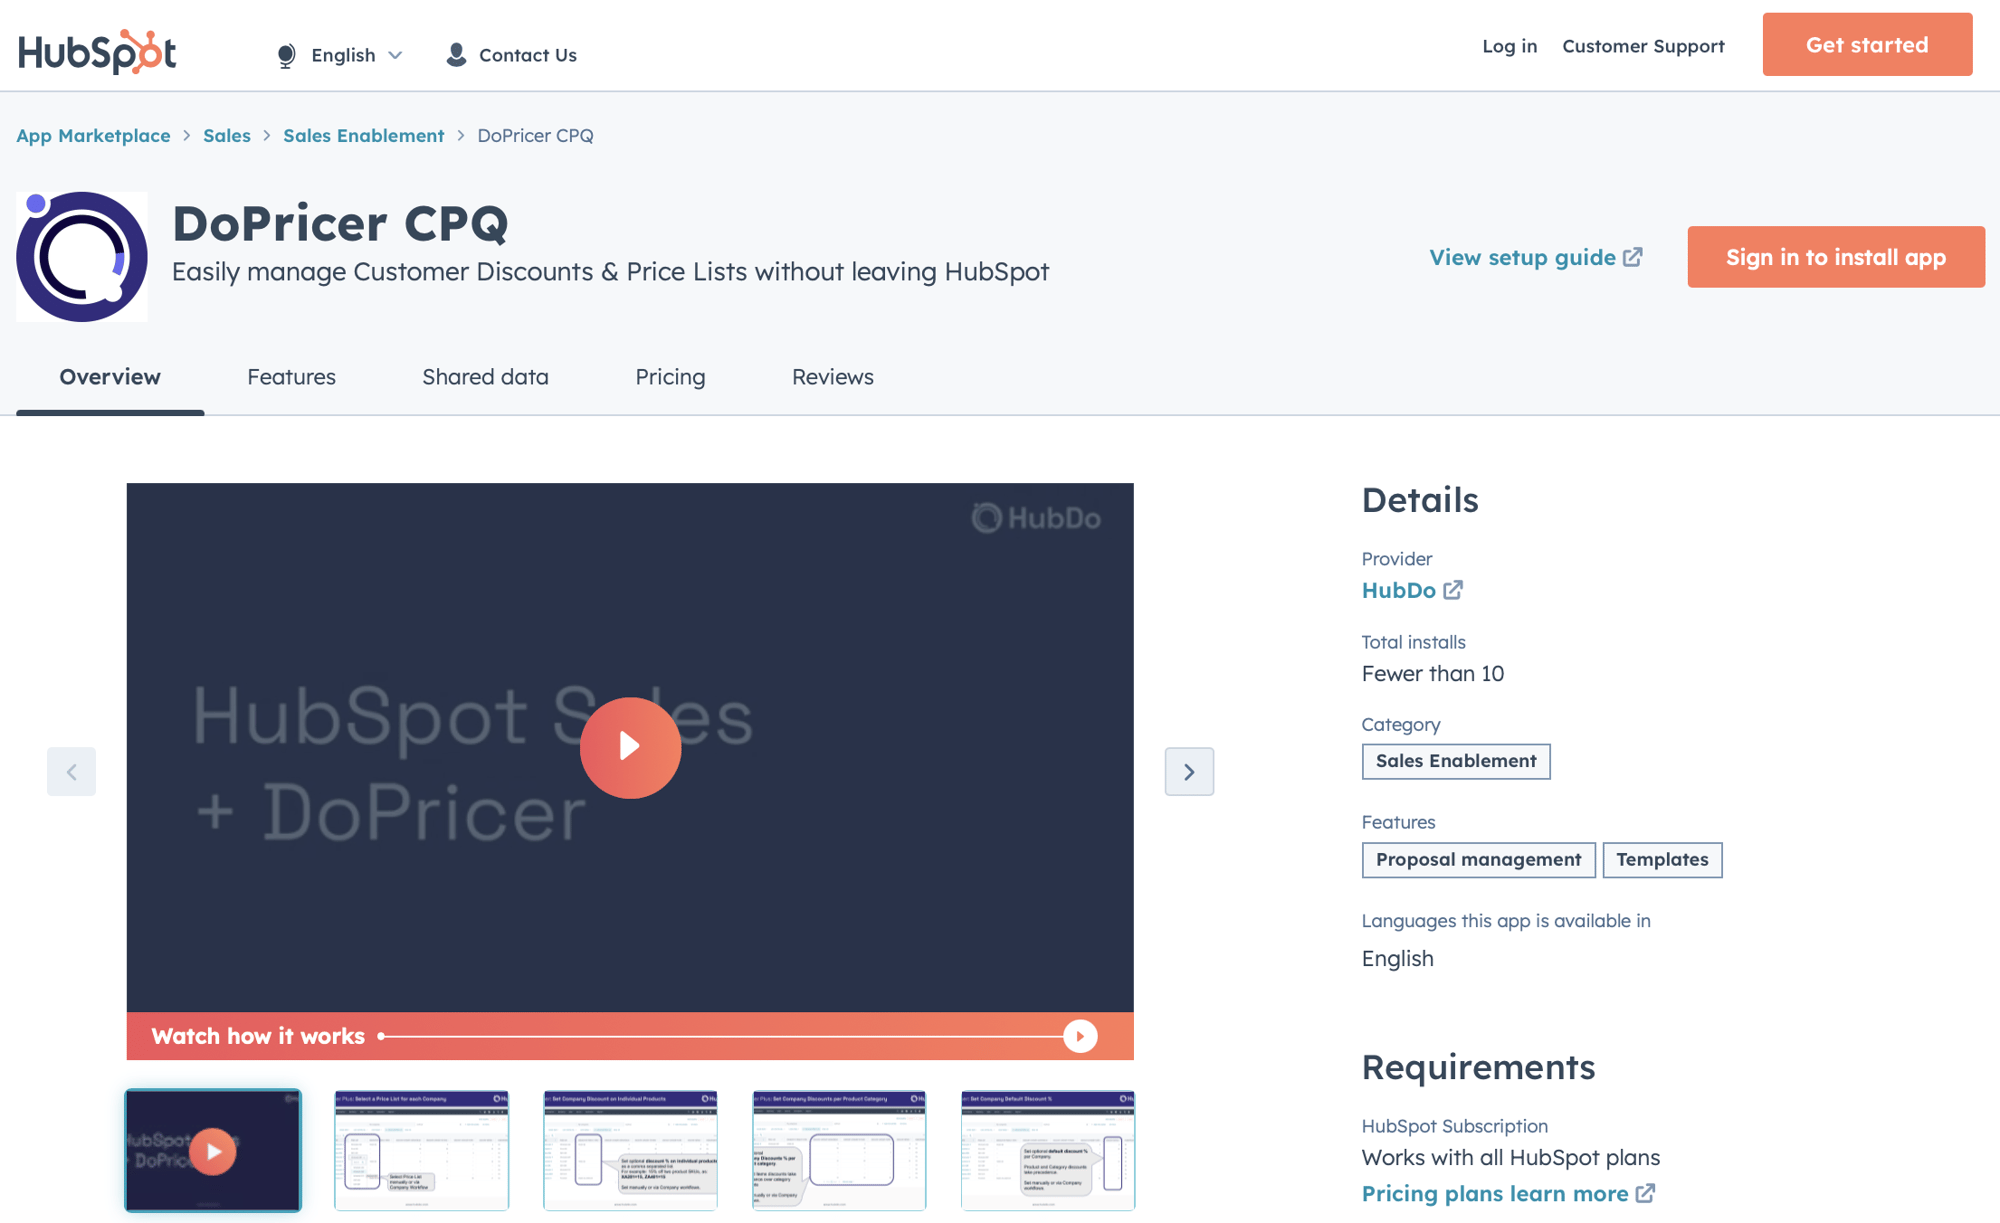 DoPricer CPQ on the HubSpot Marketplace